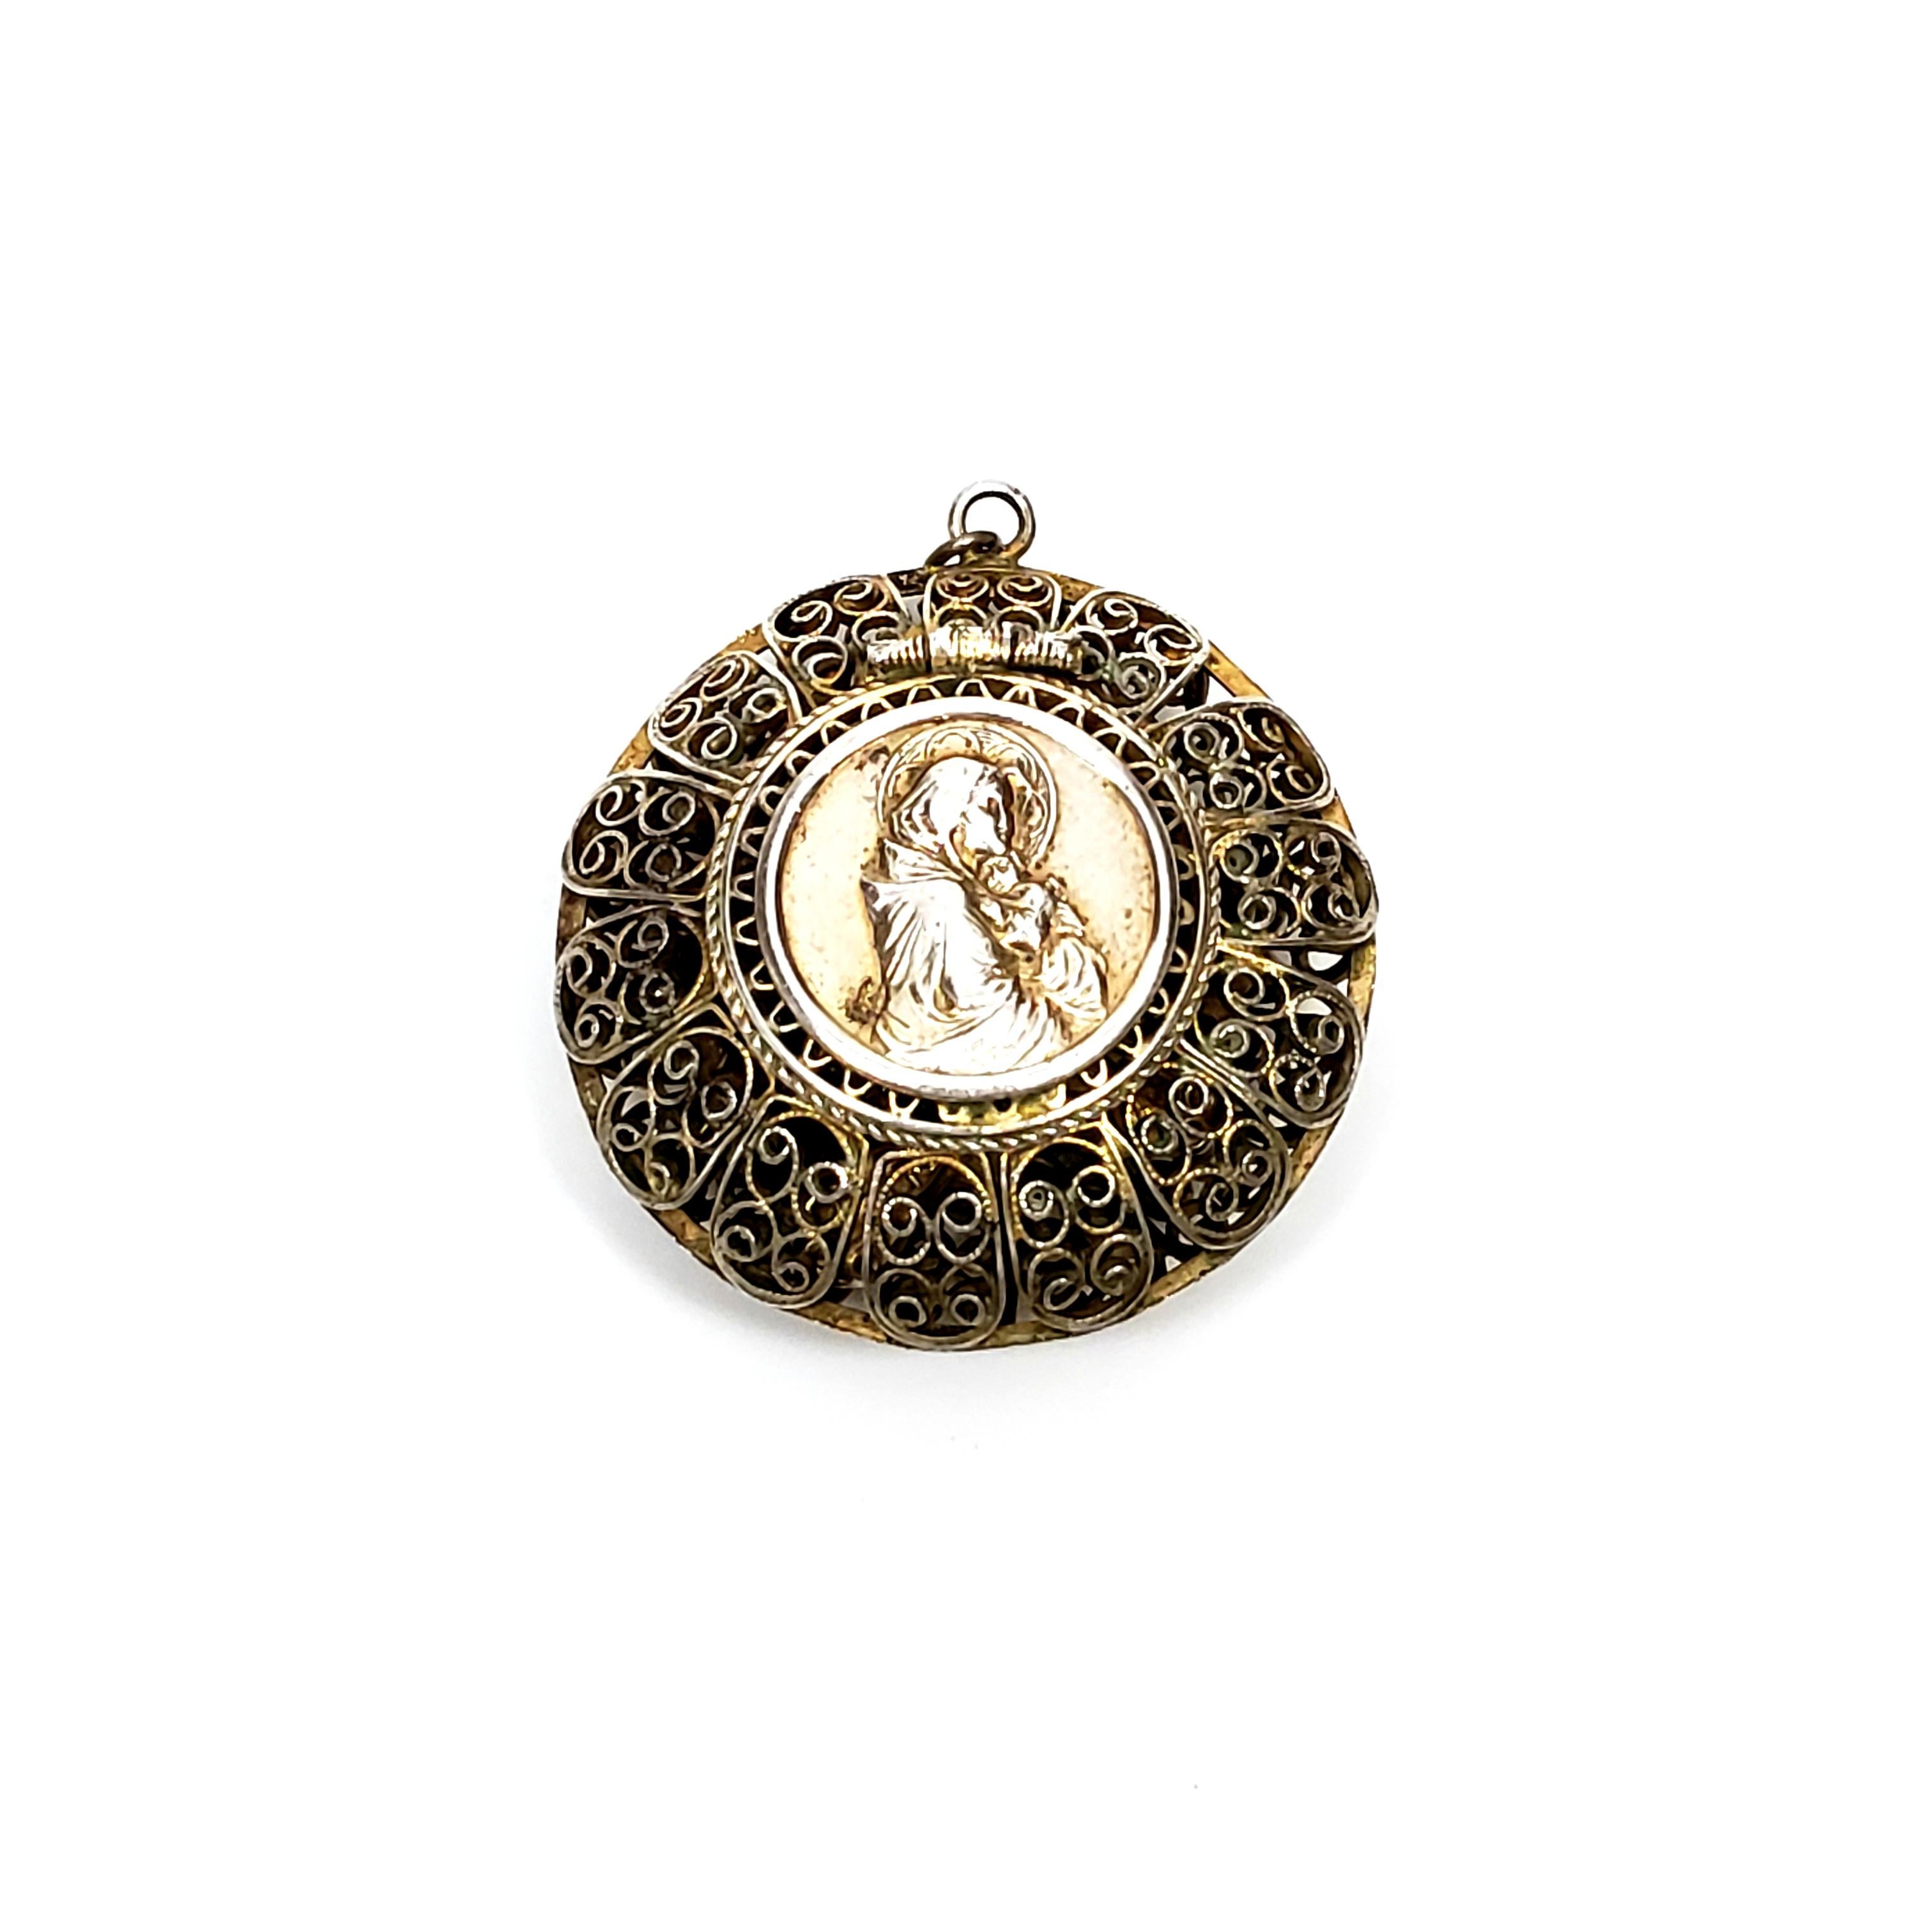 Vintage gold vermeil over 800 silver rosary necklace with round filigree box pendant.

Beautifully ornate filigree round box that can be worn as a pendant, which holds a rosary. Lid features the Mother Mary holding baby Jesus.

Box measures approx.